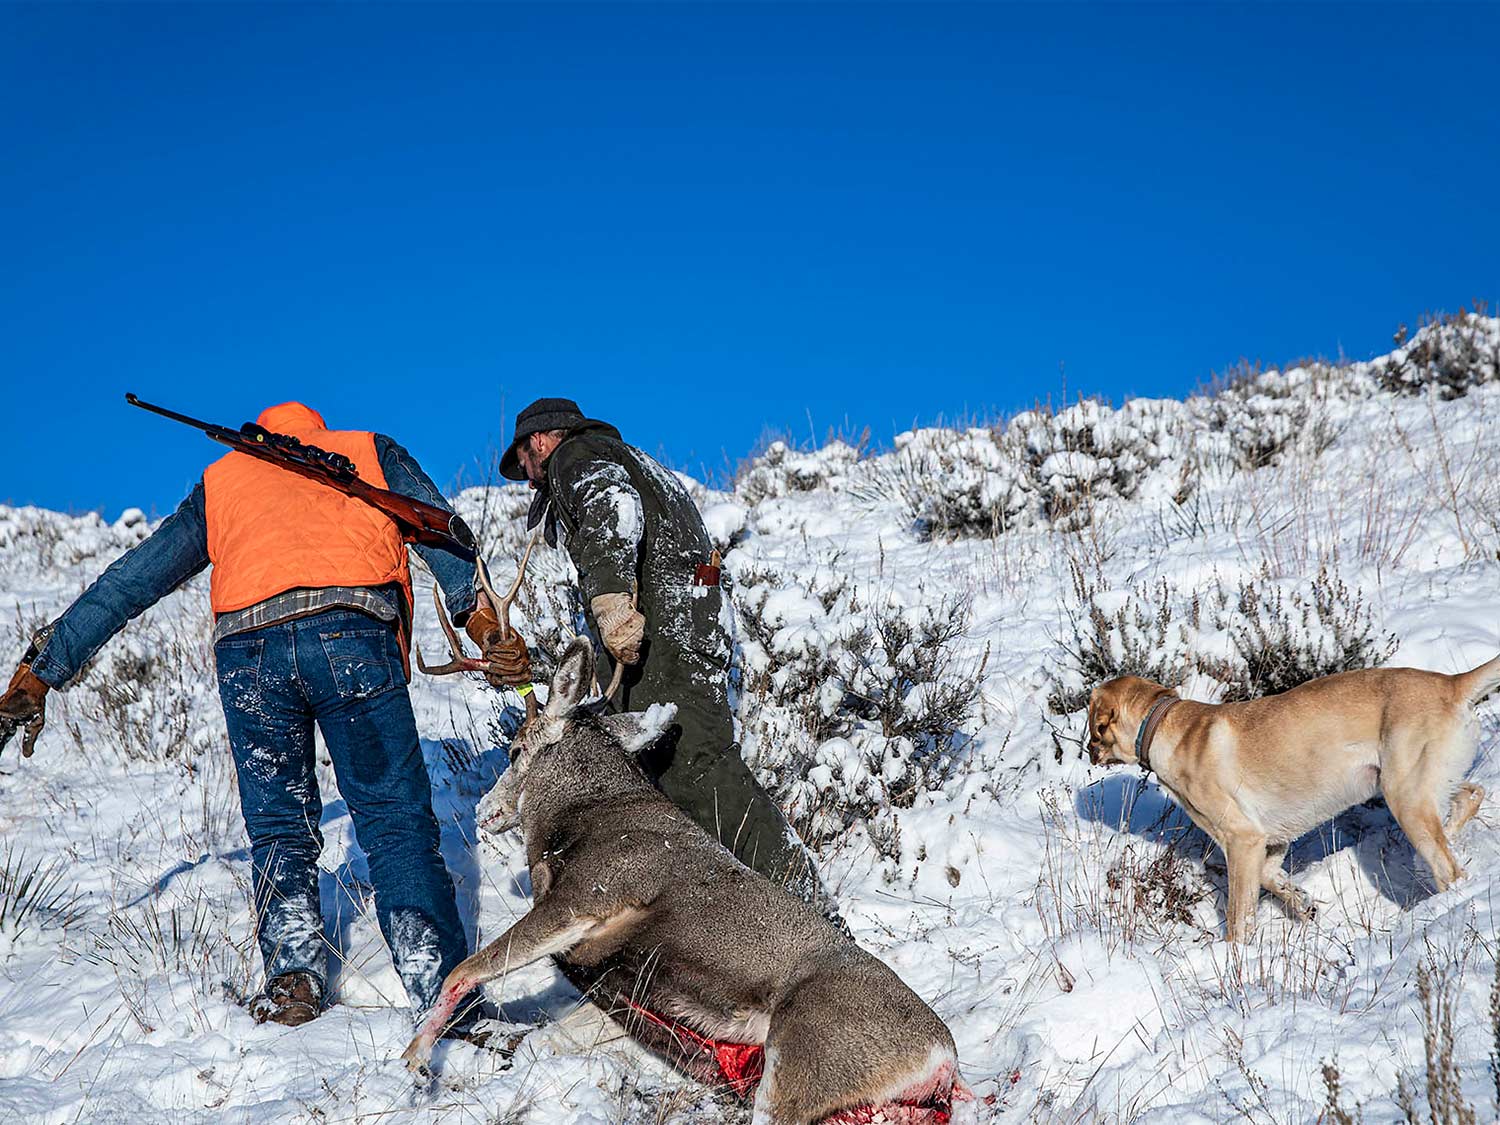 Two hunters drag a mule deer through the snow. Their hunting dogs follow.